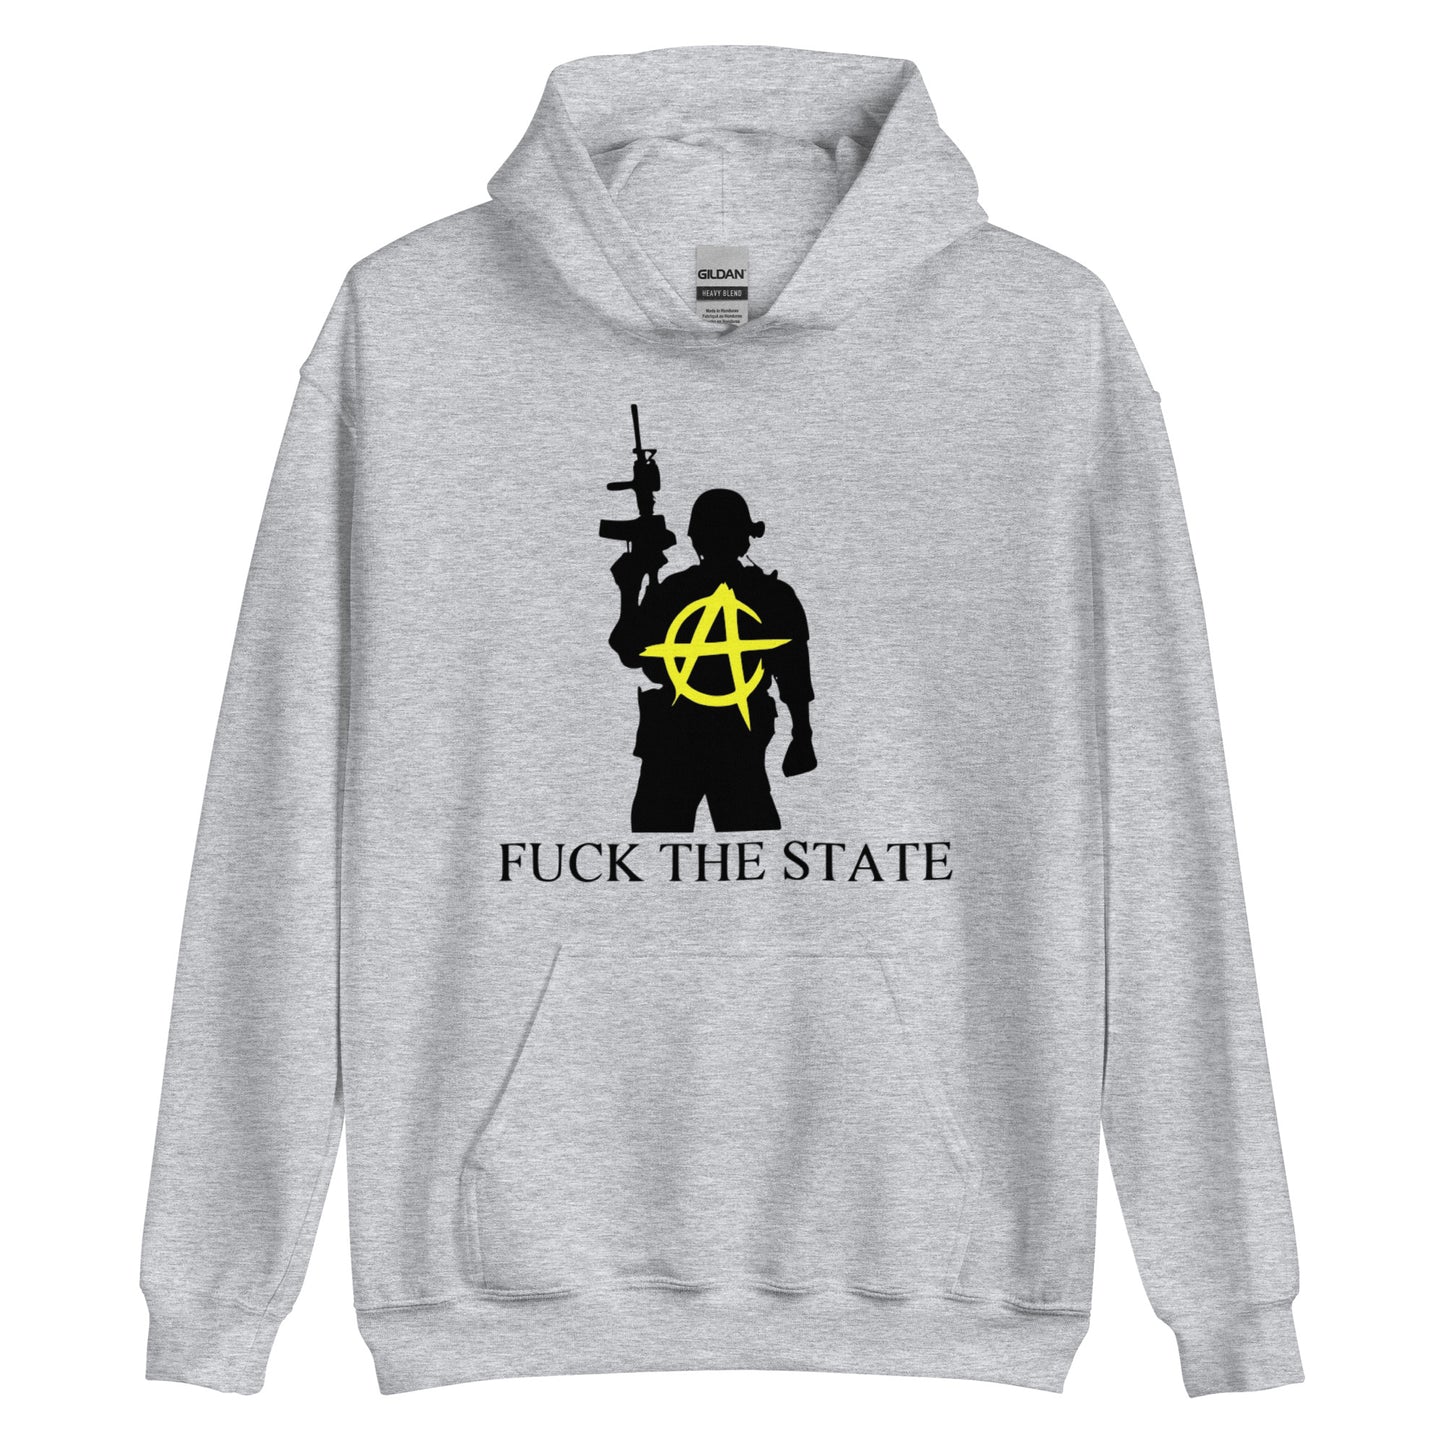 Anarchy Wear Gold Spin on "Fuck The State" By @AncapAir Hoodie